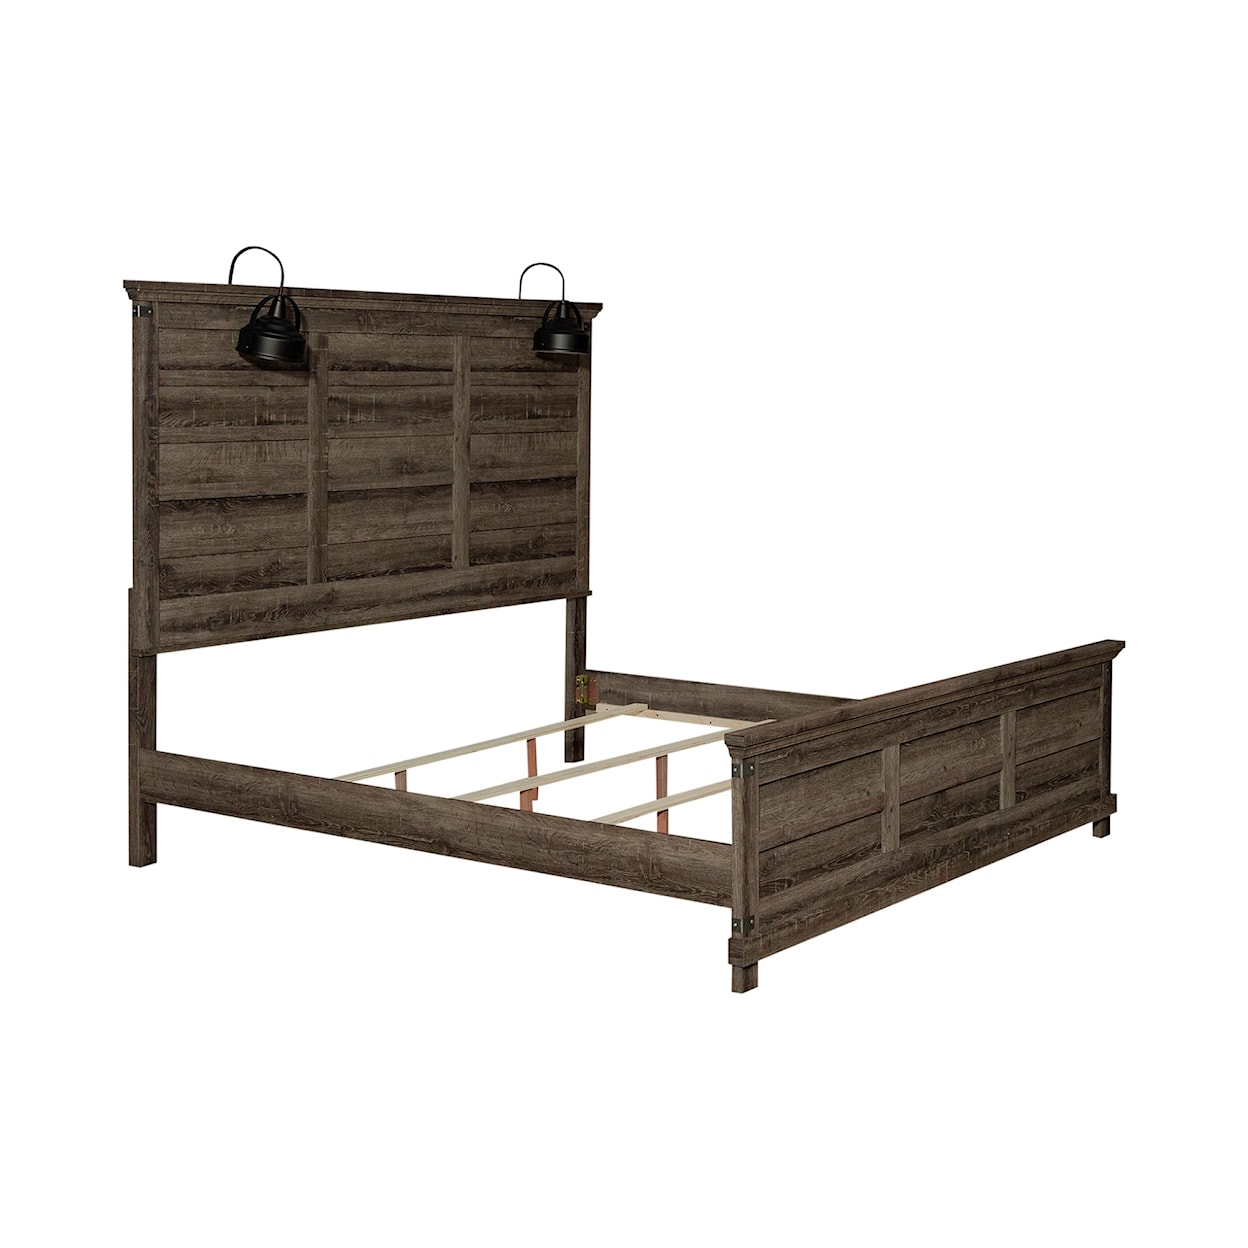 Libby Lakeside Haven 4-Piece King Bedroom Set